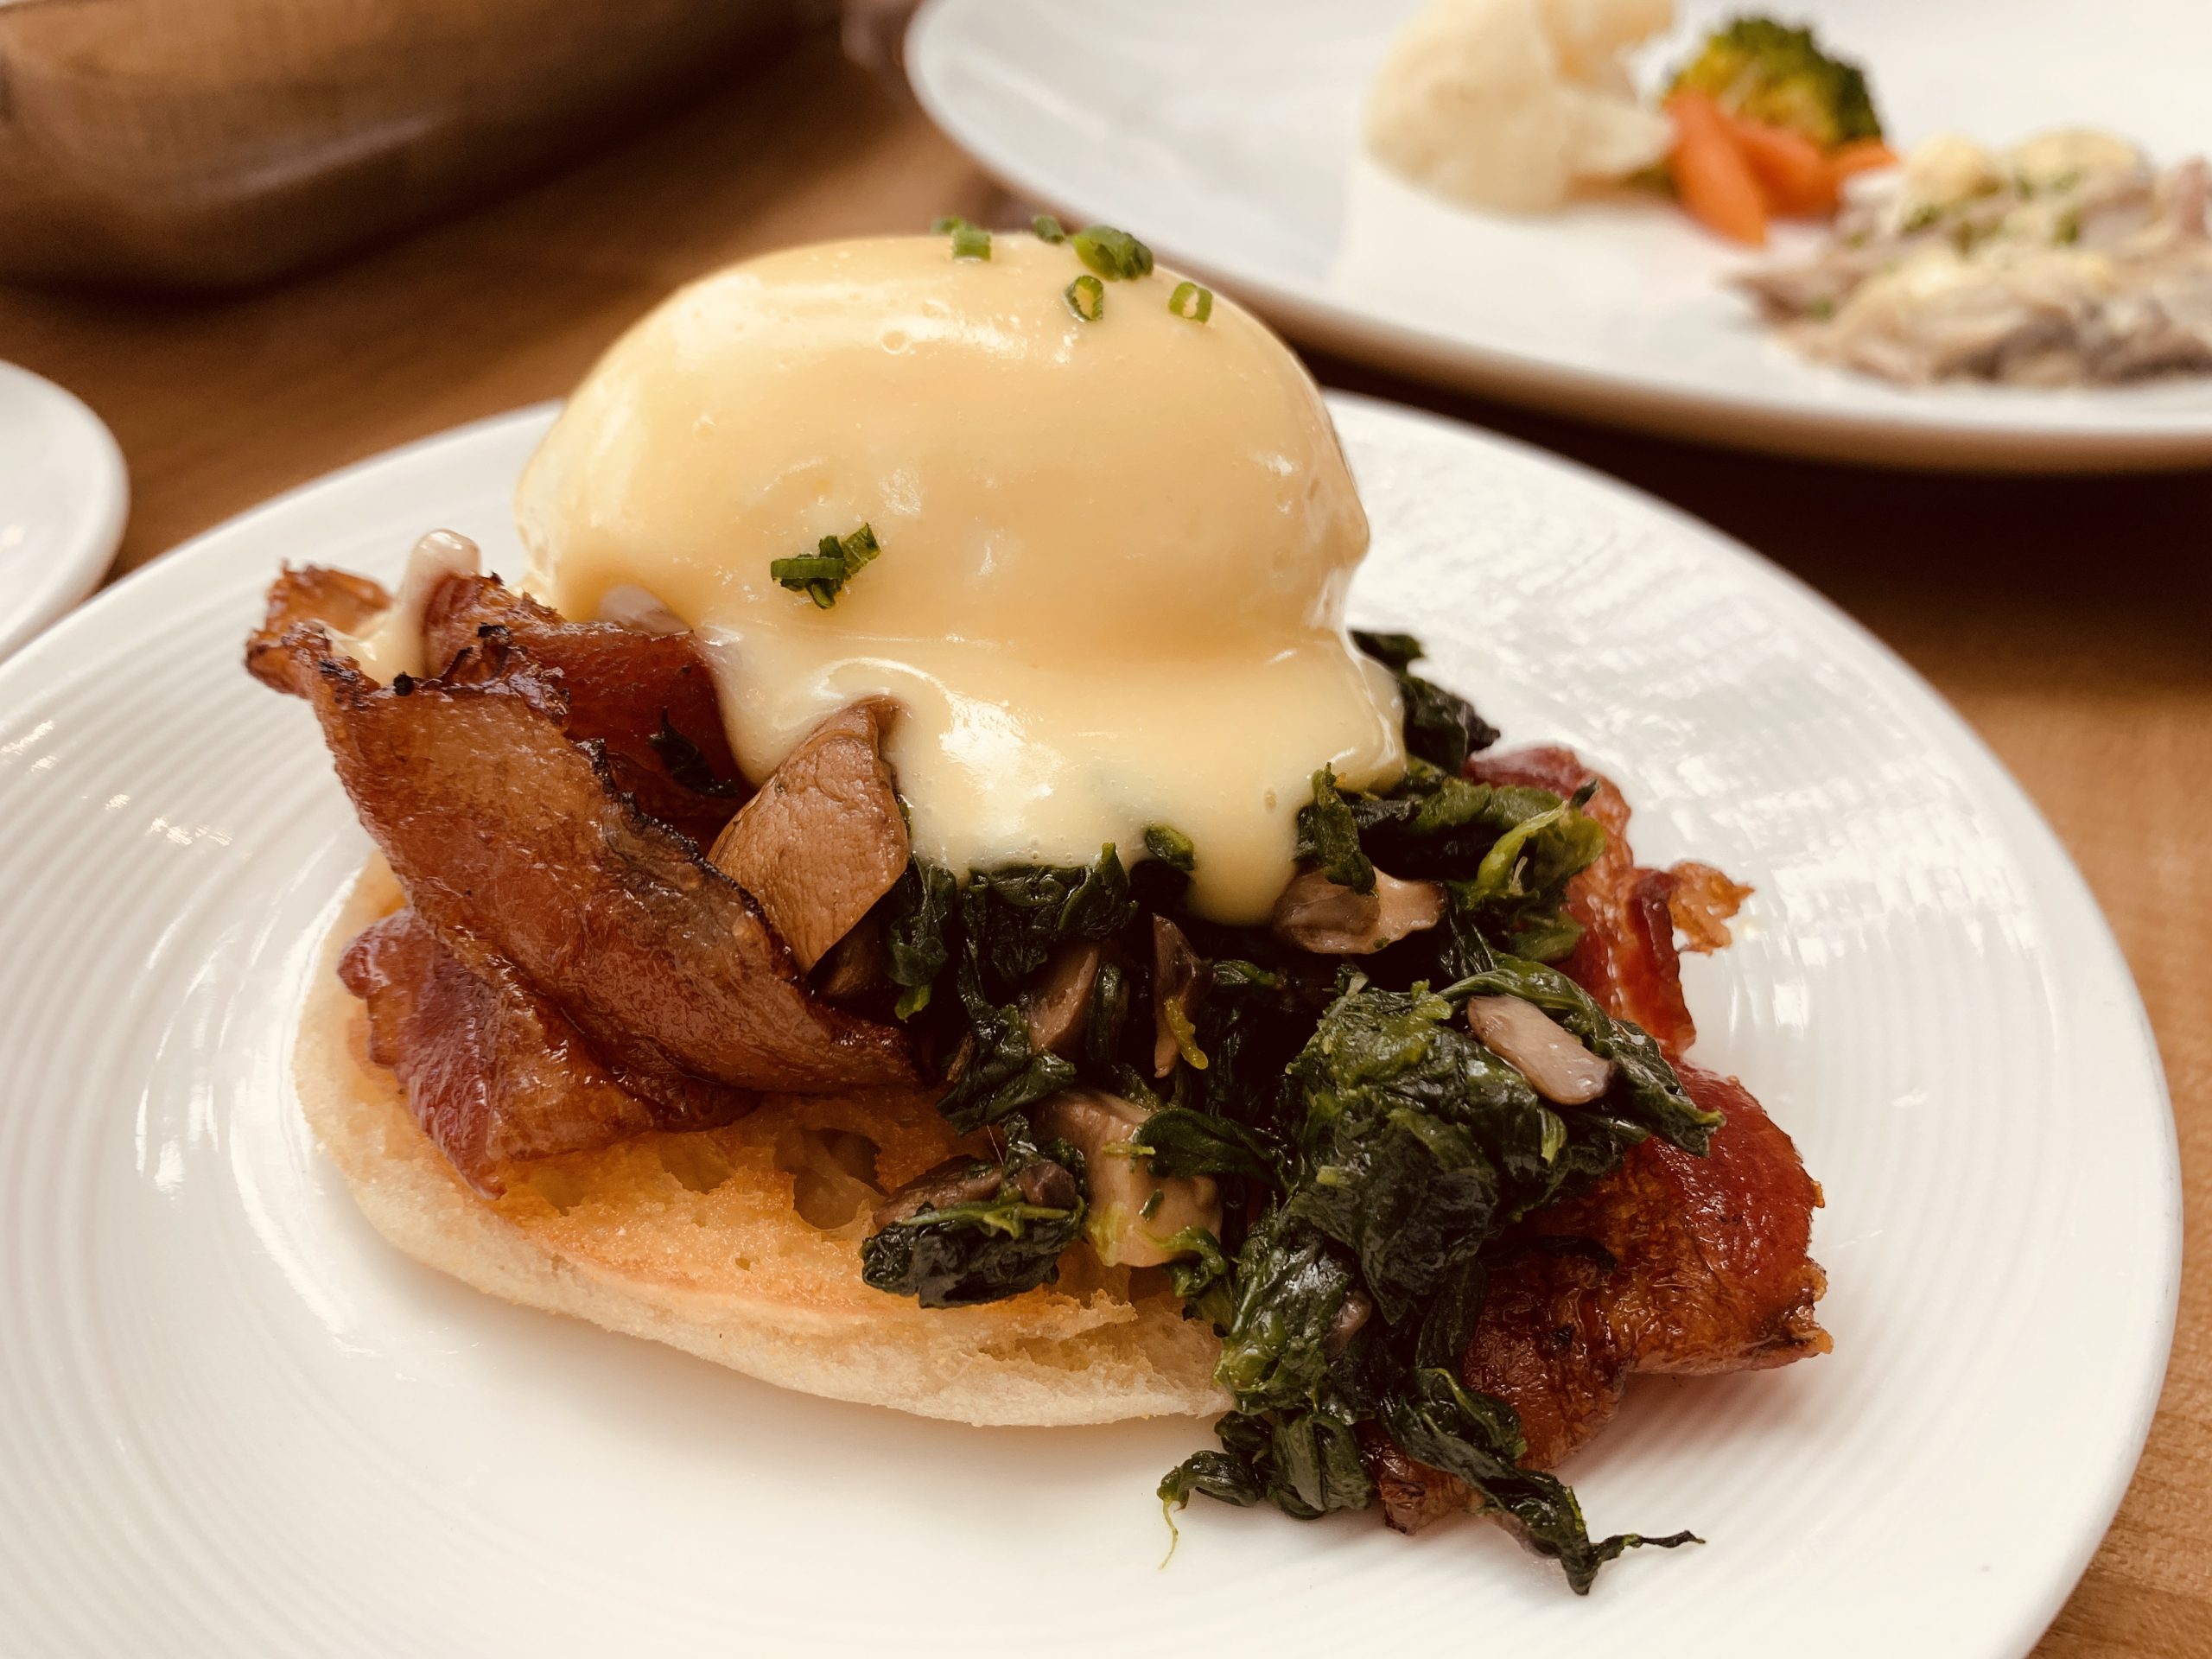 Rise Restaurant - Eggs Benedict with Bacon, Spinach & Mushroom